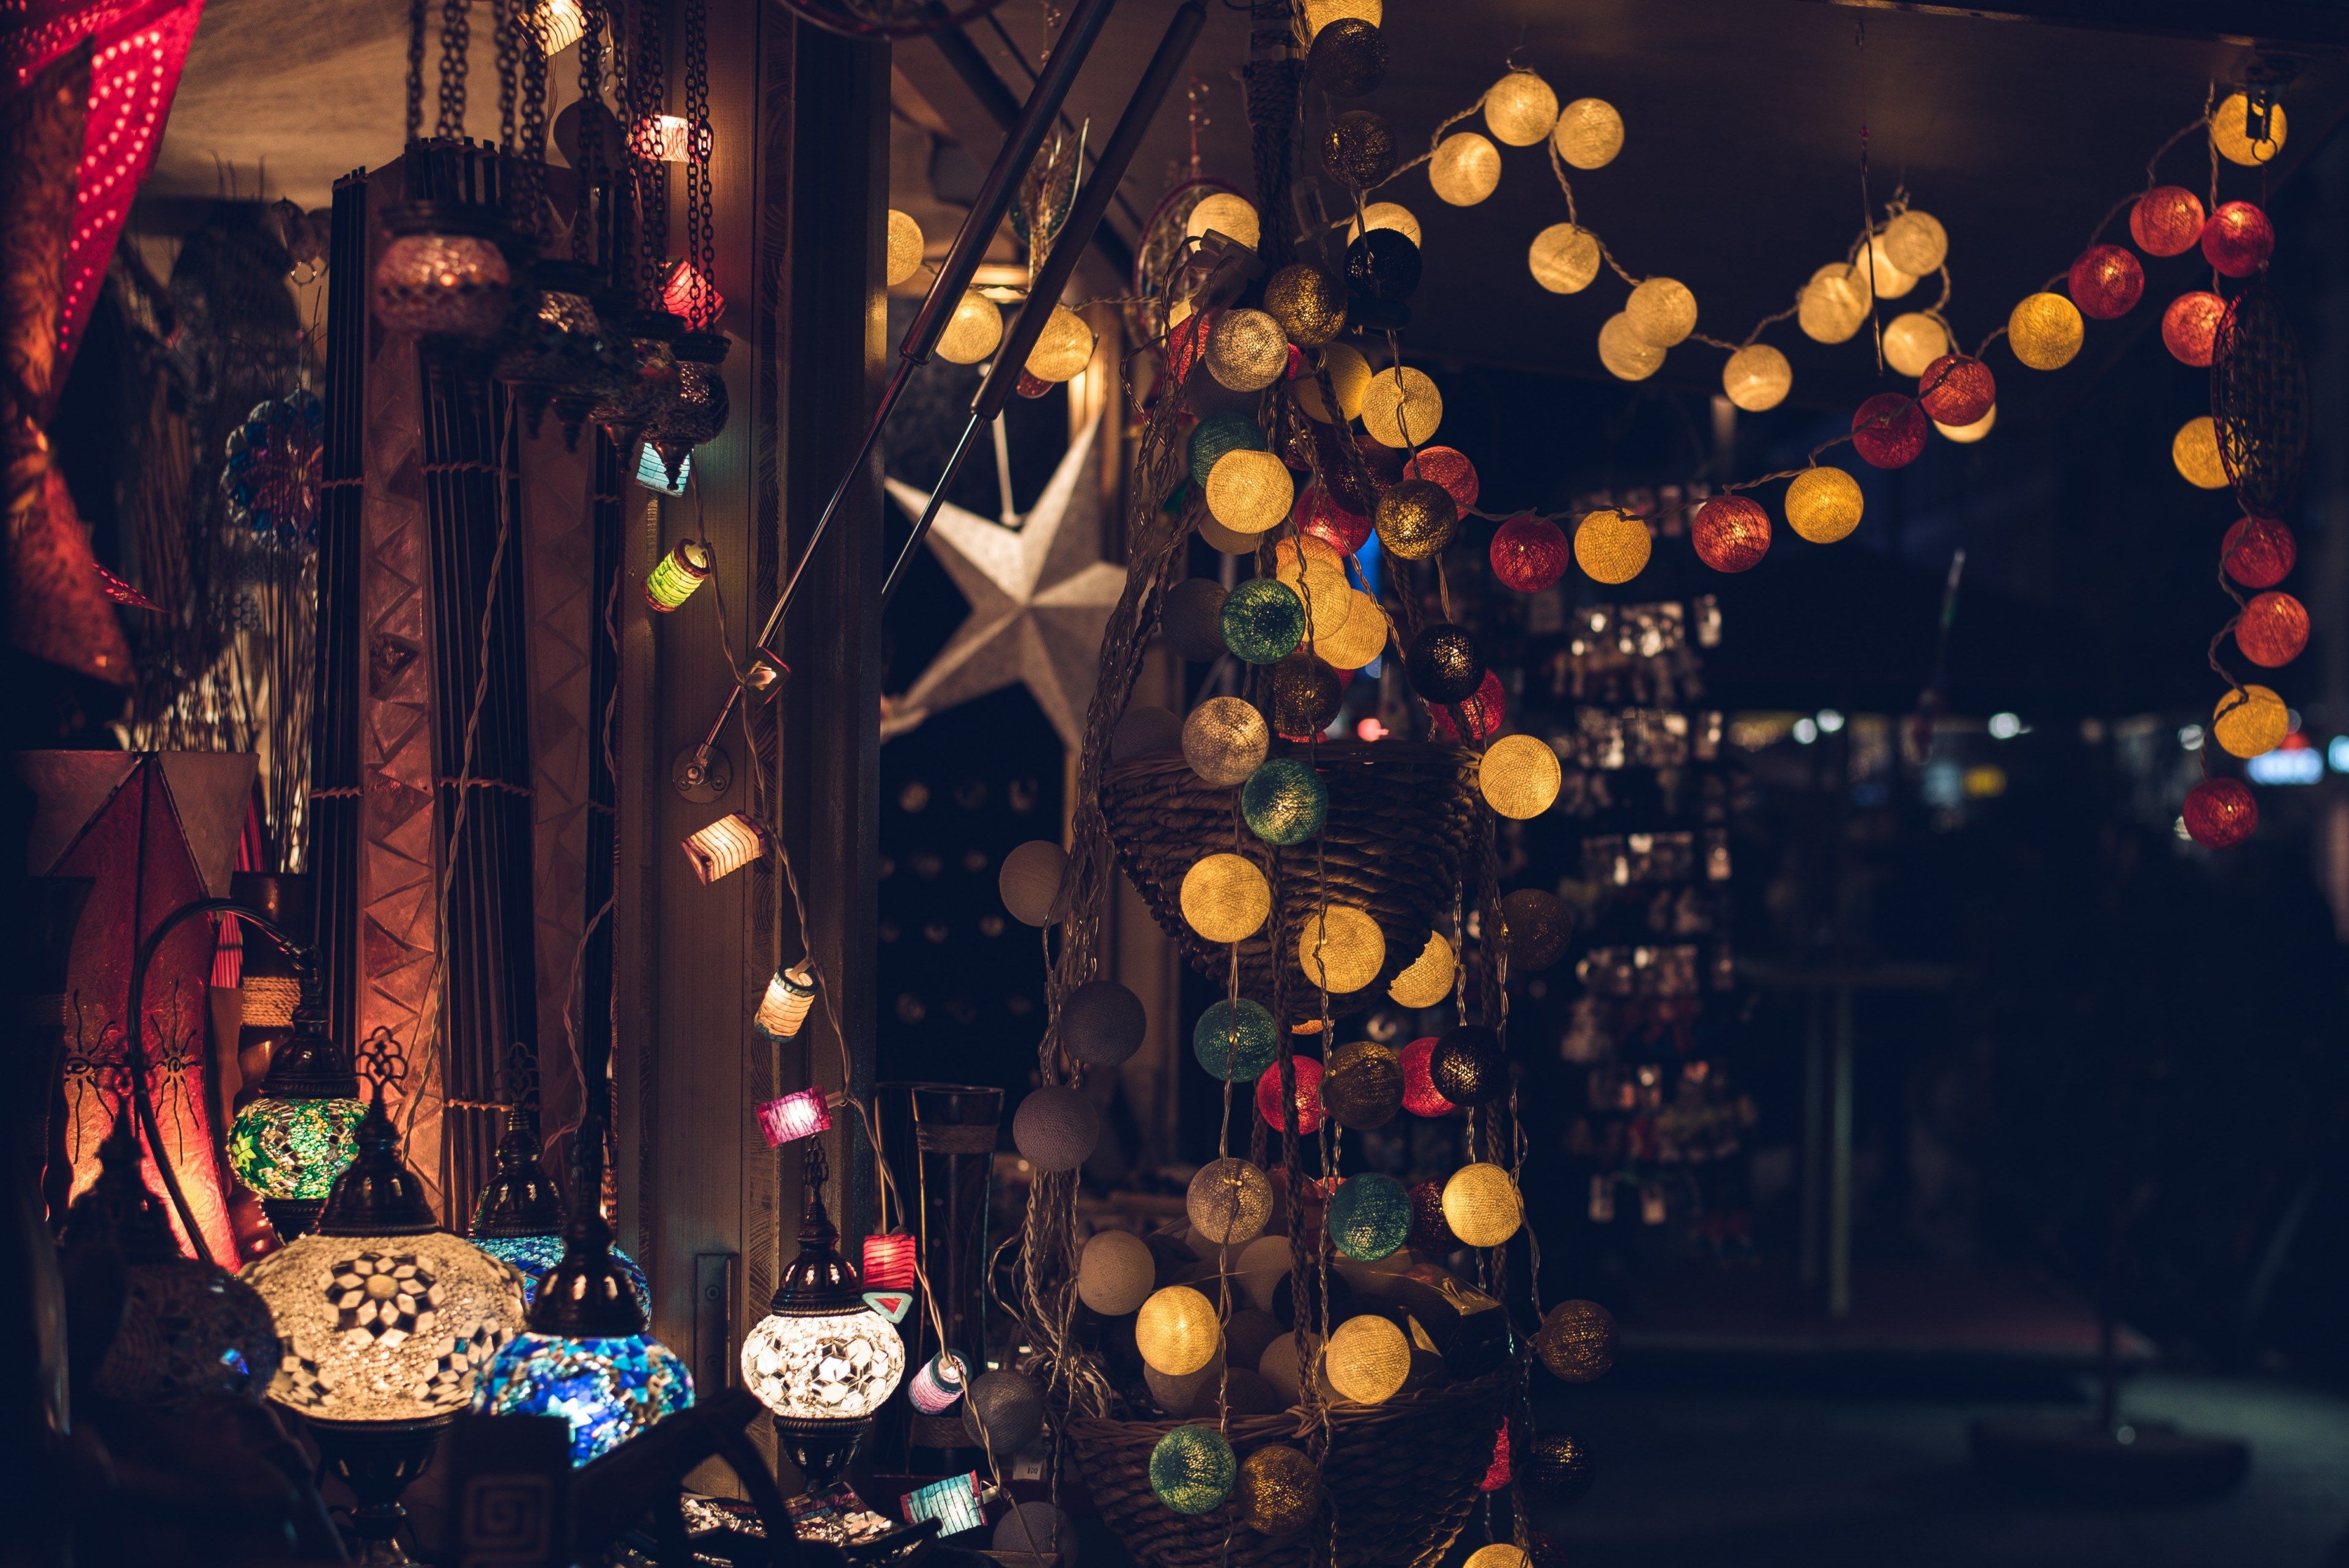 Wallpaper / round christmas lights and colorful lamps in a room, christmas lights and lamps 4k wallpaper free download